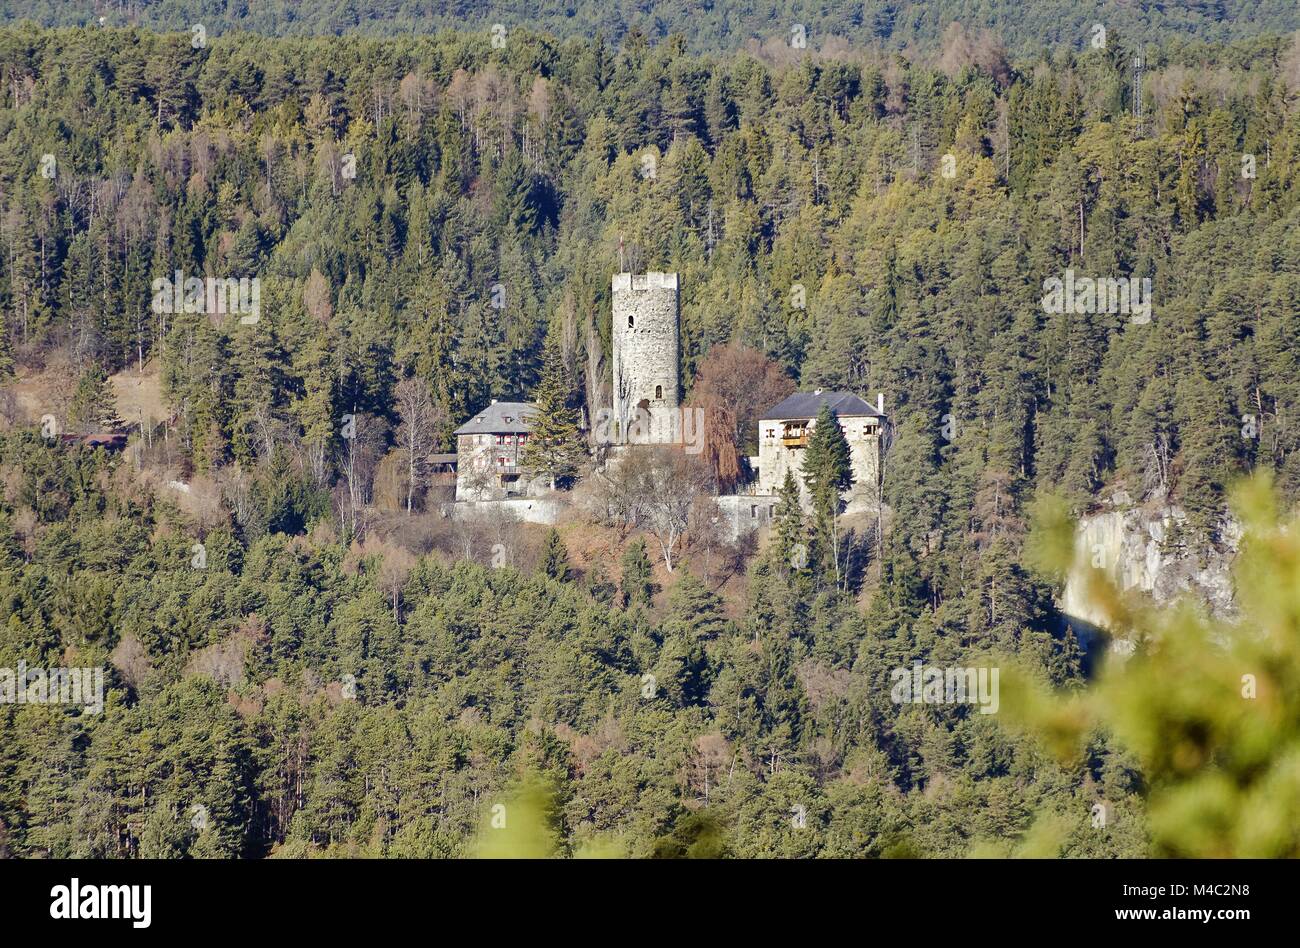 castle Klamm in the forest area of Obsteig Stock Photo